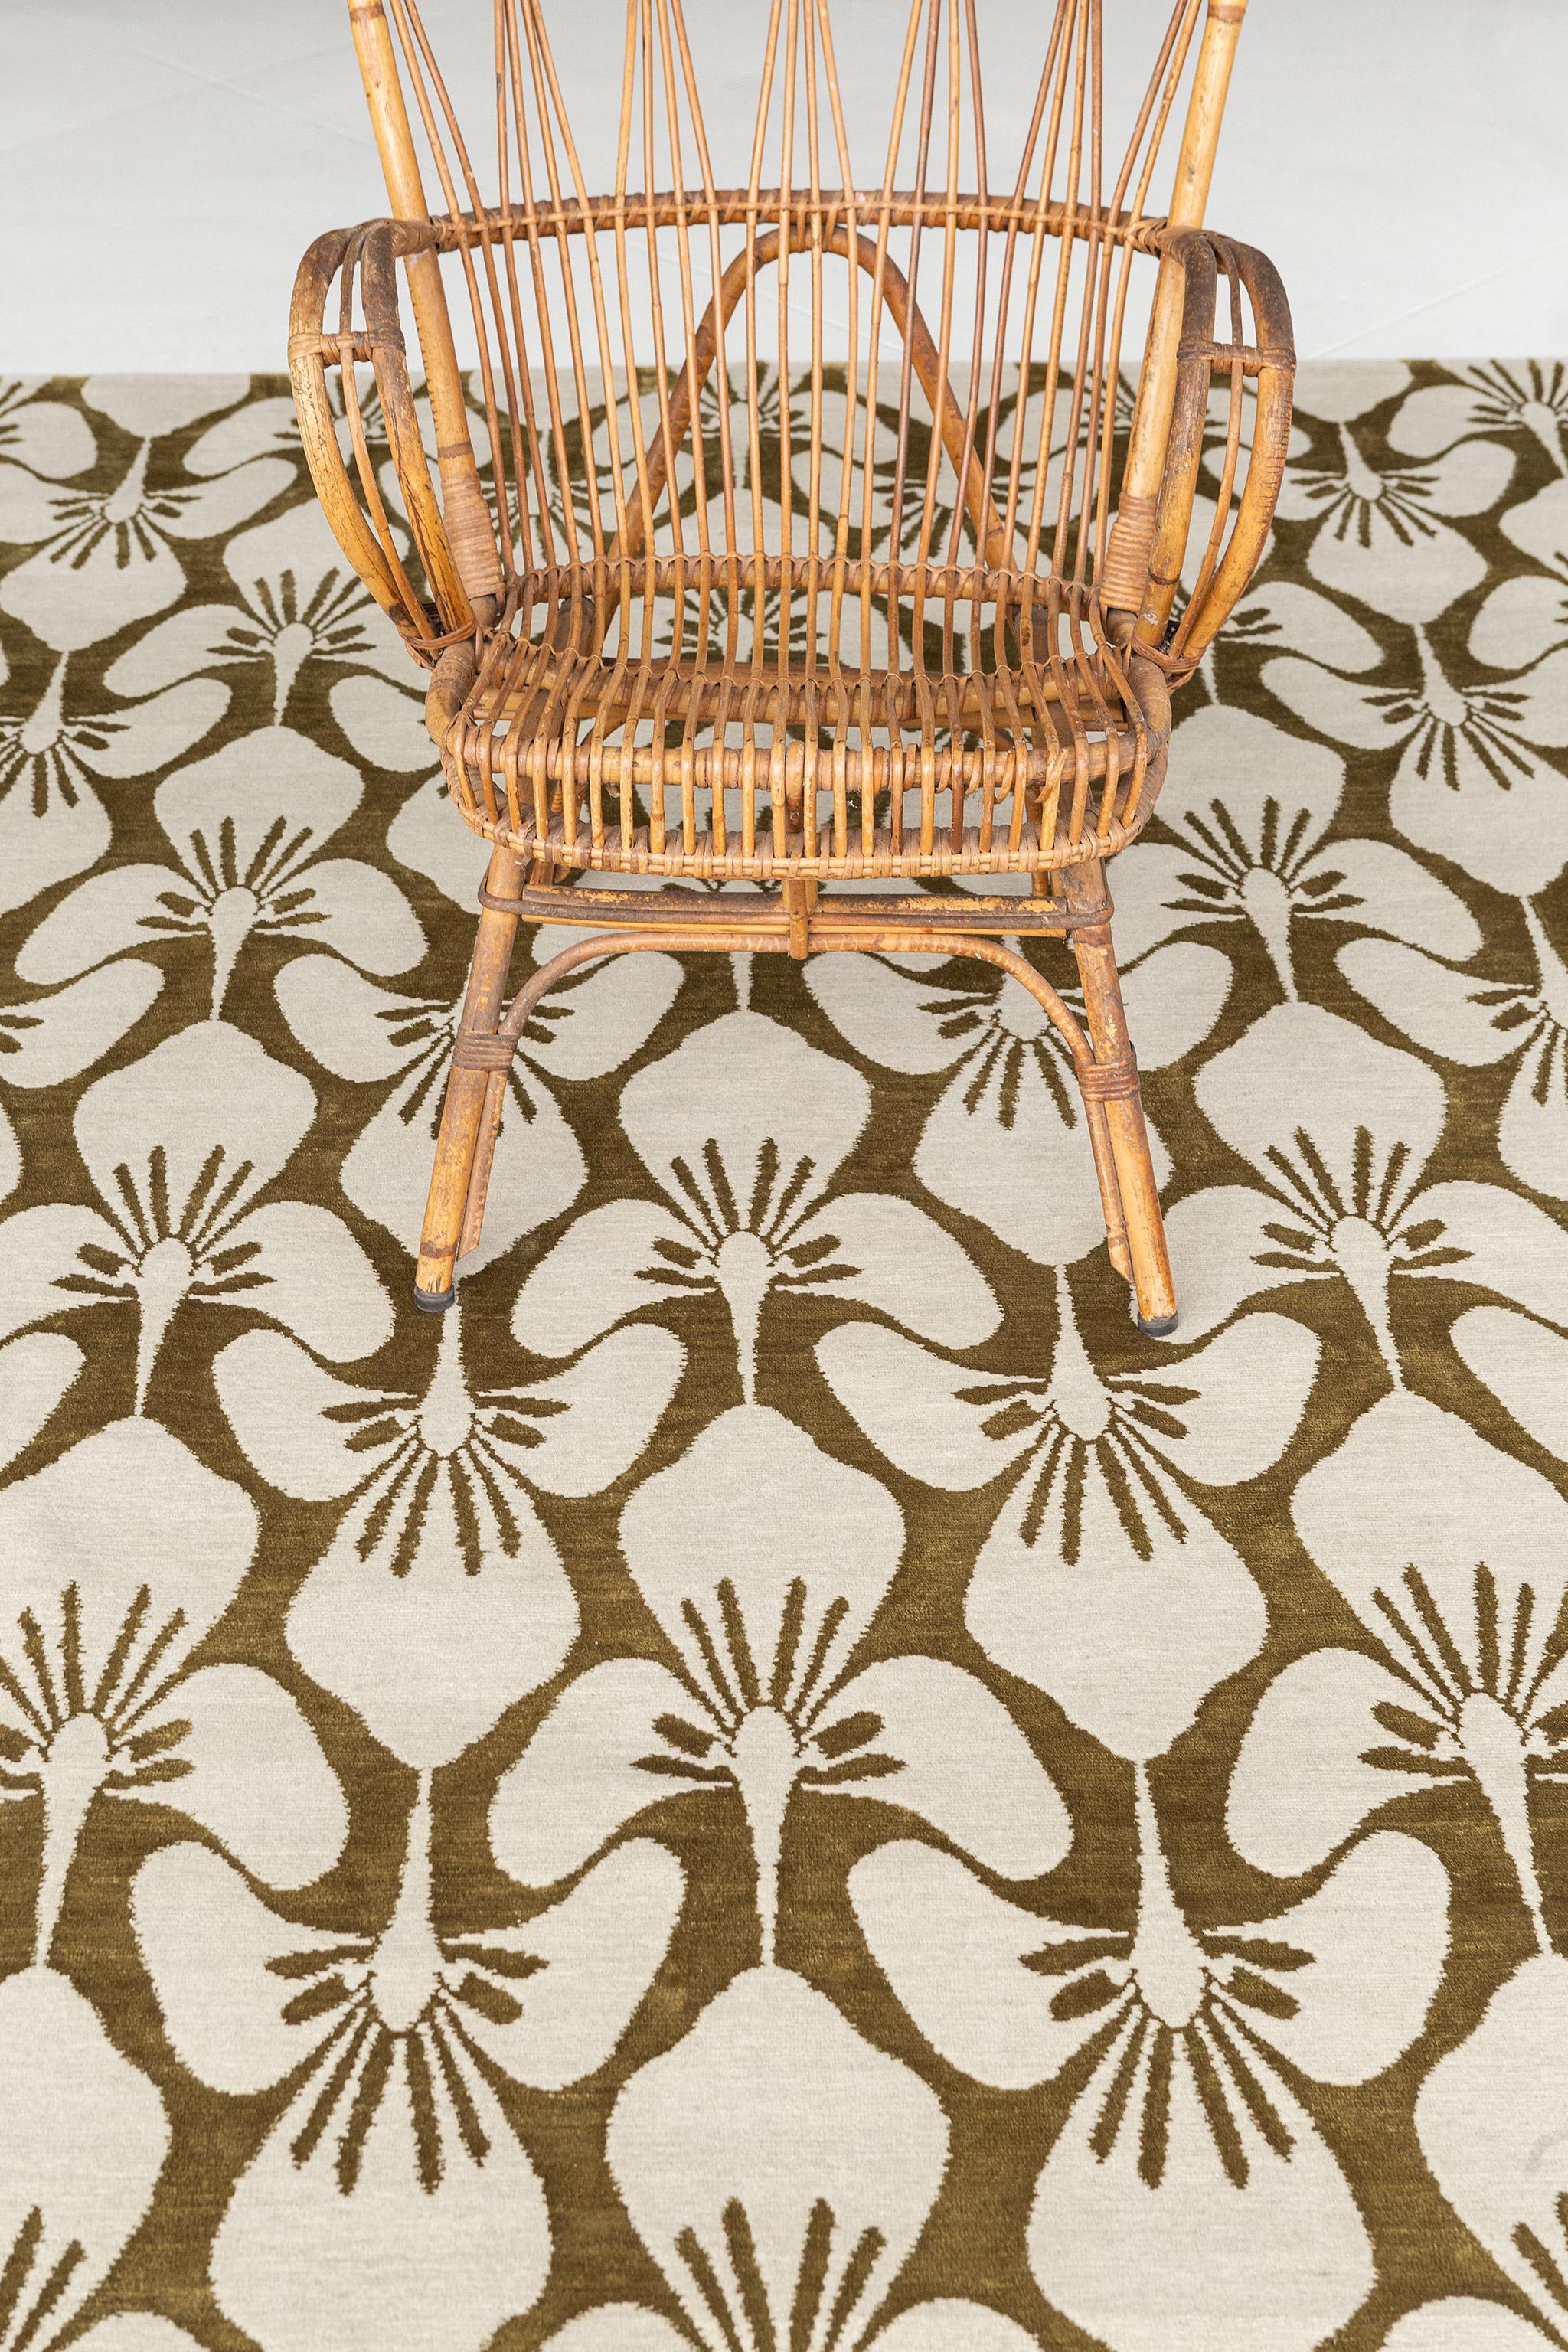 Bali' is a beautiful transitional design from our Allure Collection. An all over floral design in a brassy olive color and nickel background. This piece is both sophisticated and versatile for any design space. The well-harmonized colors and subtle